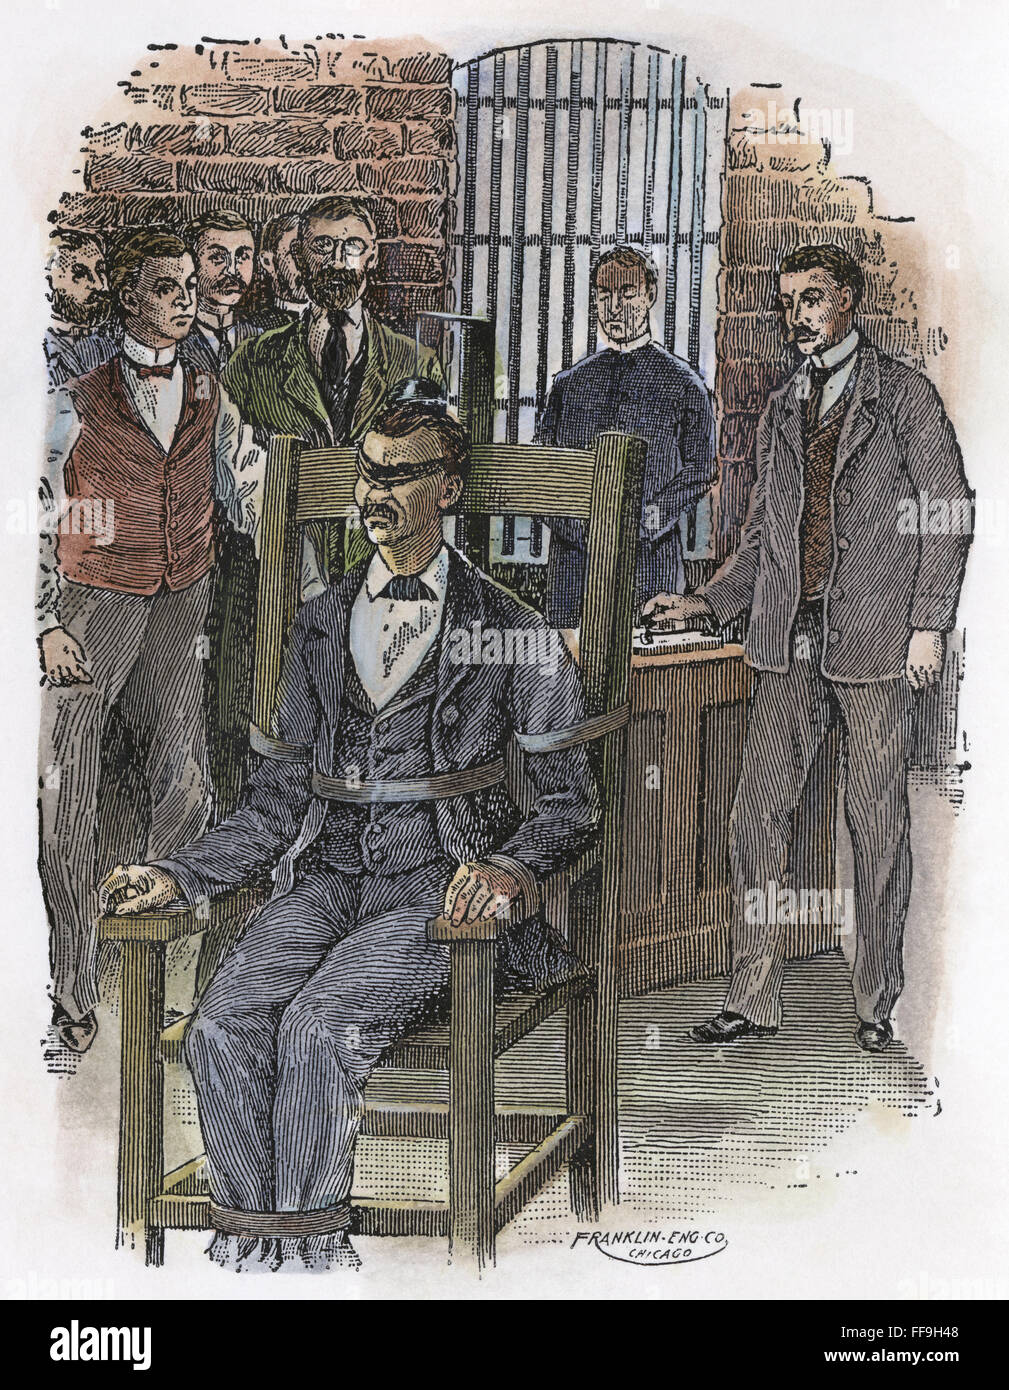 KEMMLER EXECUTION /nThe first execution by electrocution, of William Kemmler, for murder, at Auburn Prison, Auburn, New York, on Aug. 6, 1890. Contemporary line engraving. Stock Photo